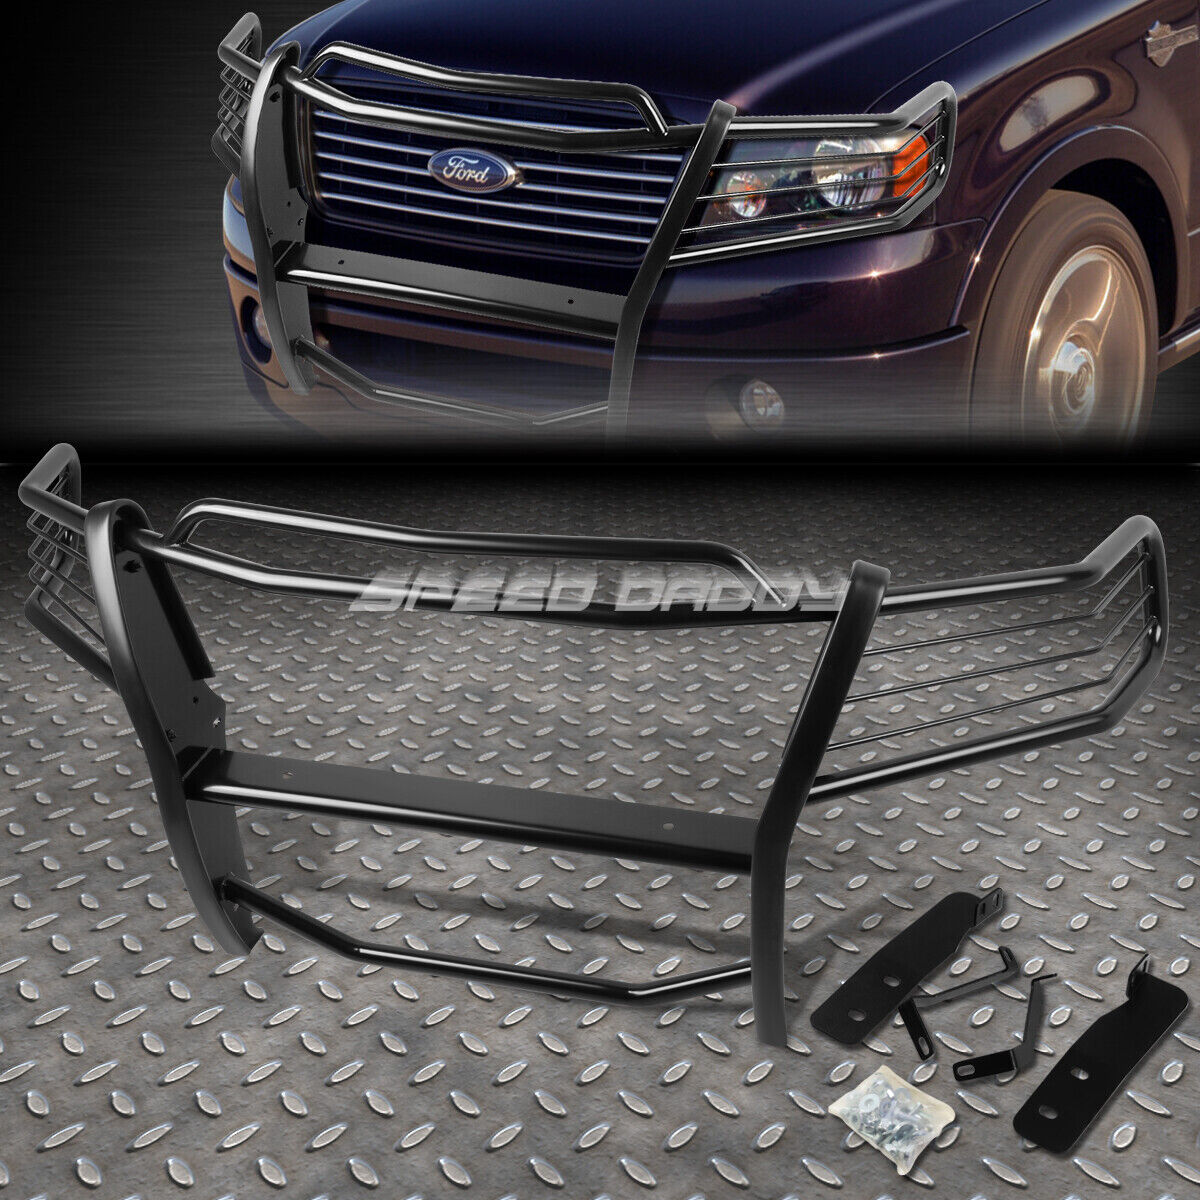 FOR 04-08 FORD F150 PICKUP TRUCK BLACK COATED MILD STEEL FRONT GRILL FRAME GUARD